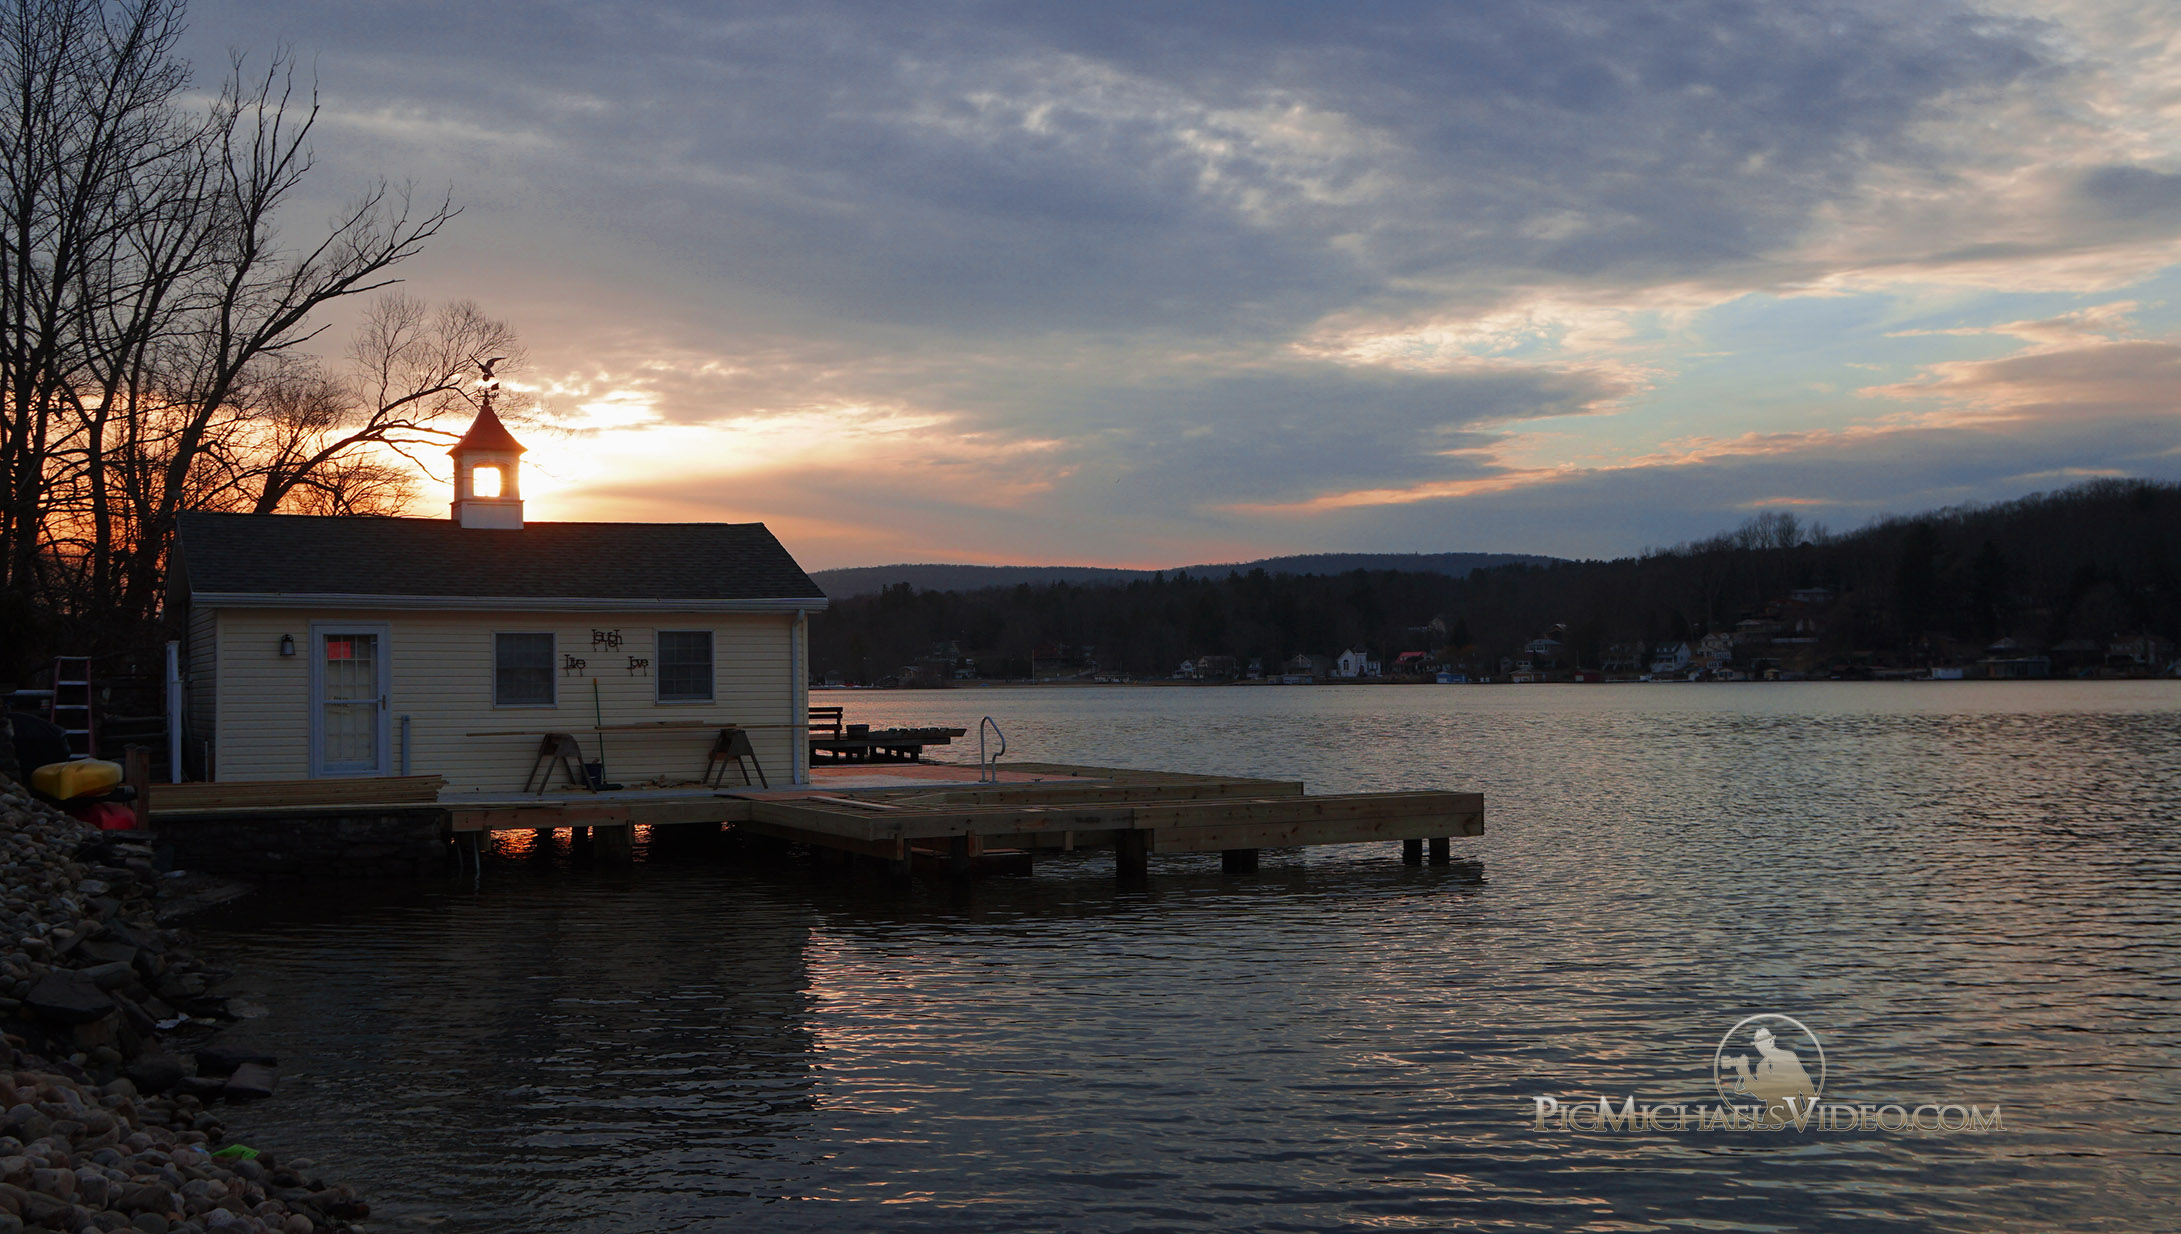 A late winter scene at Harveys Lake in Pennsylvania as the suns sinks slowly behind a boathouse.